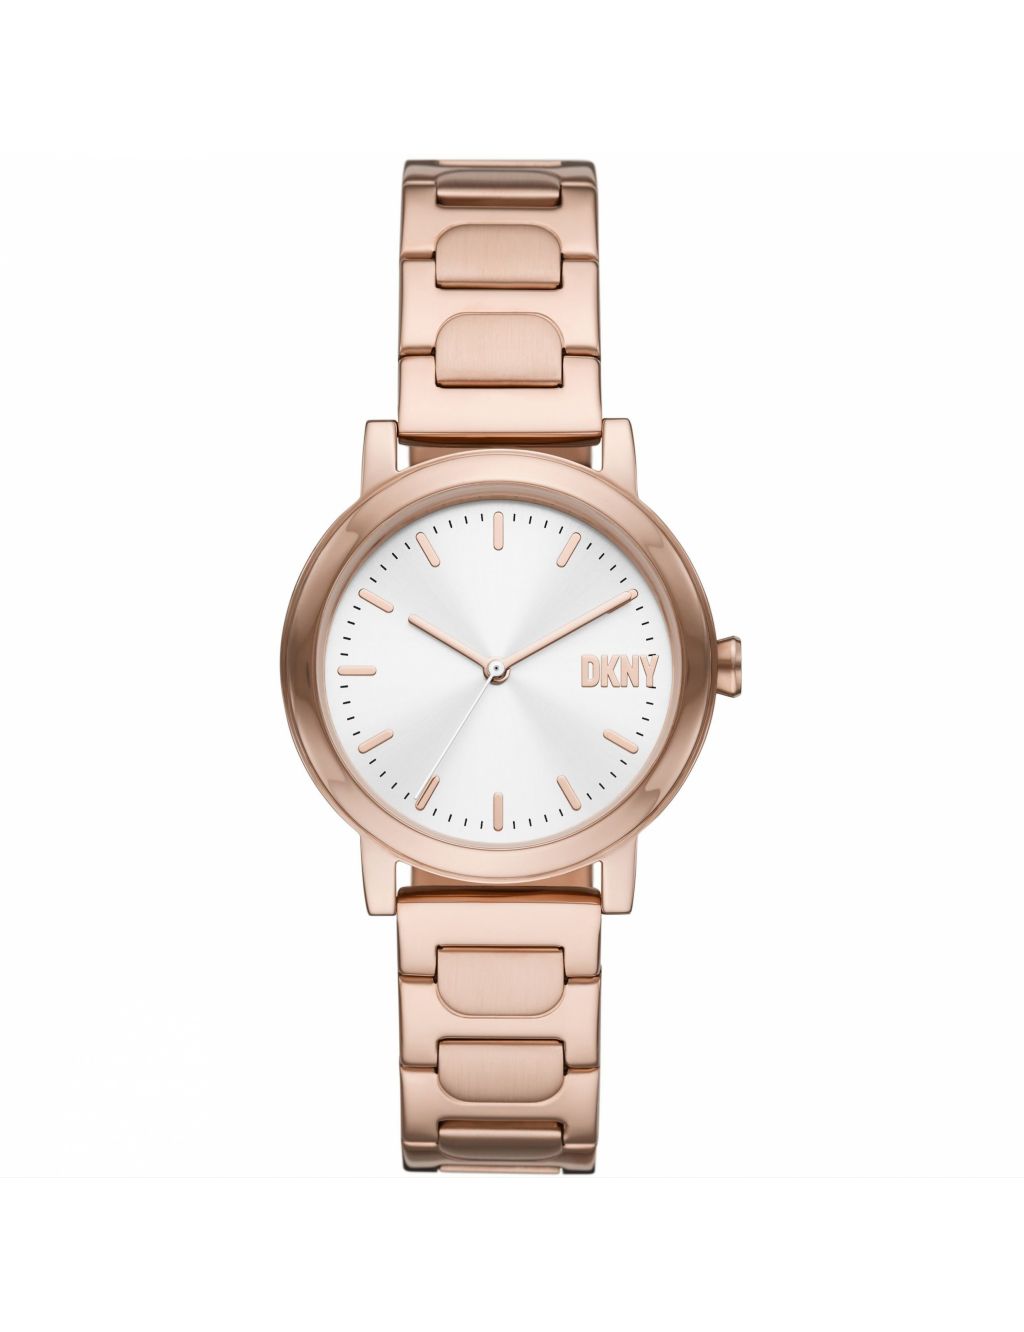 DKNY 7th Avenue Rose Gold Stainless Steel Watch